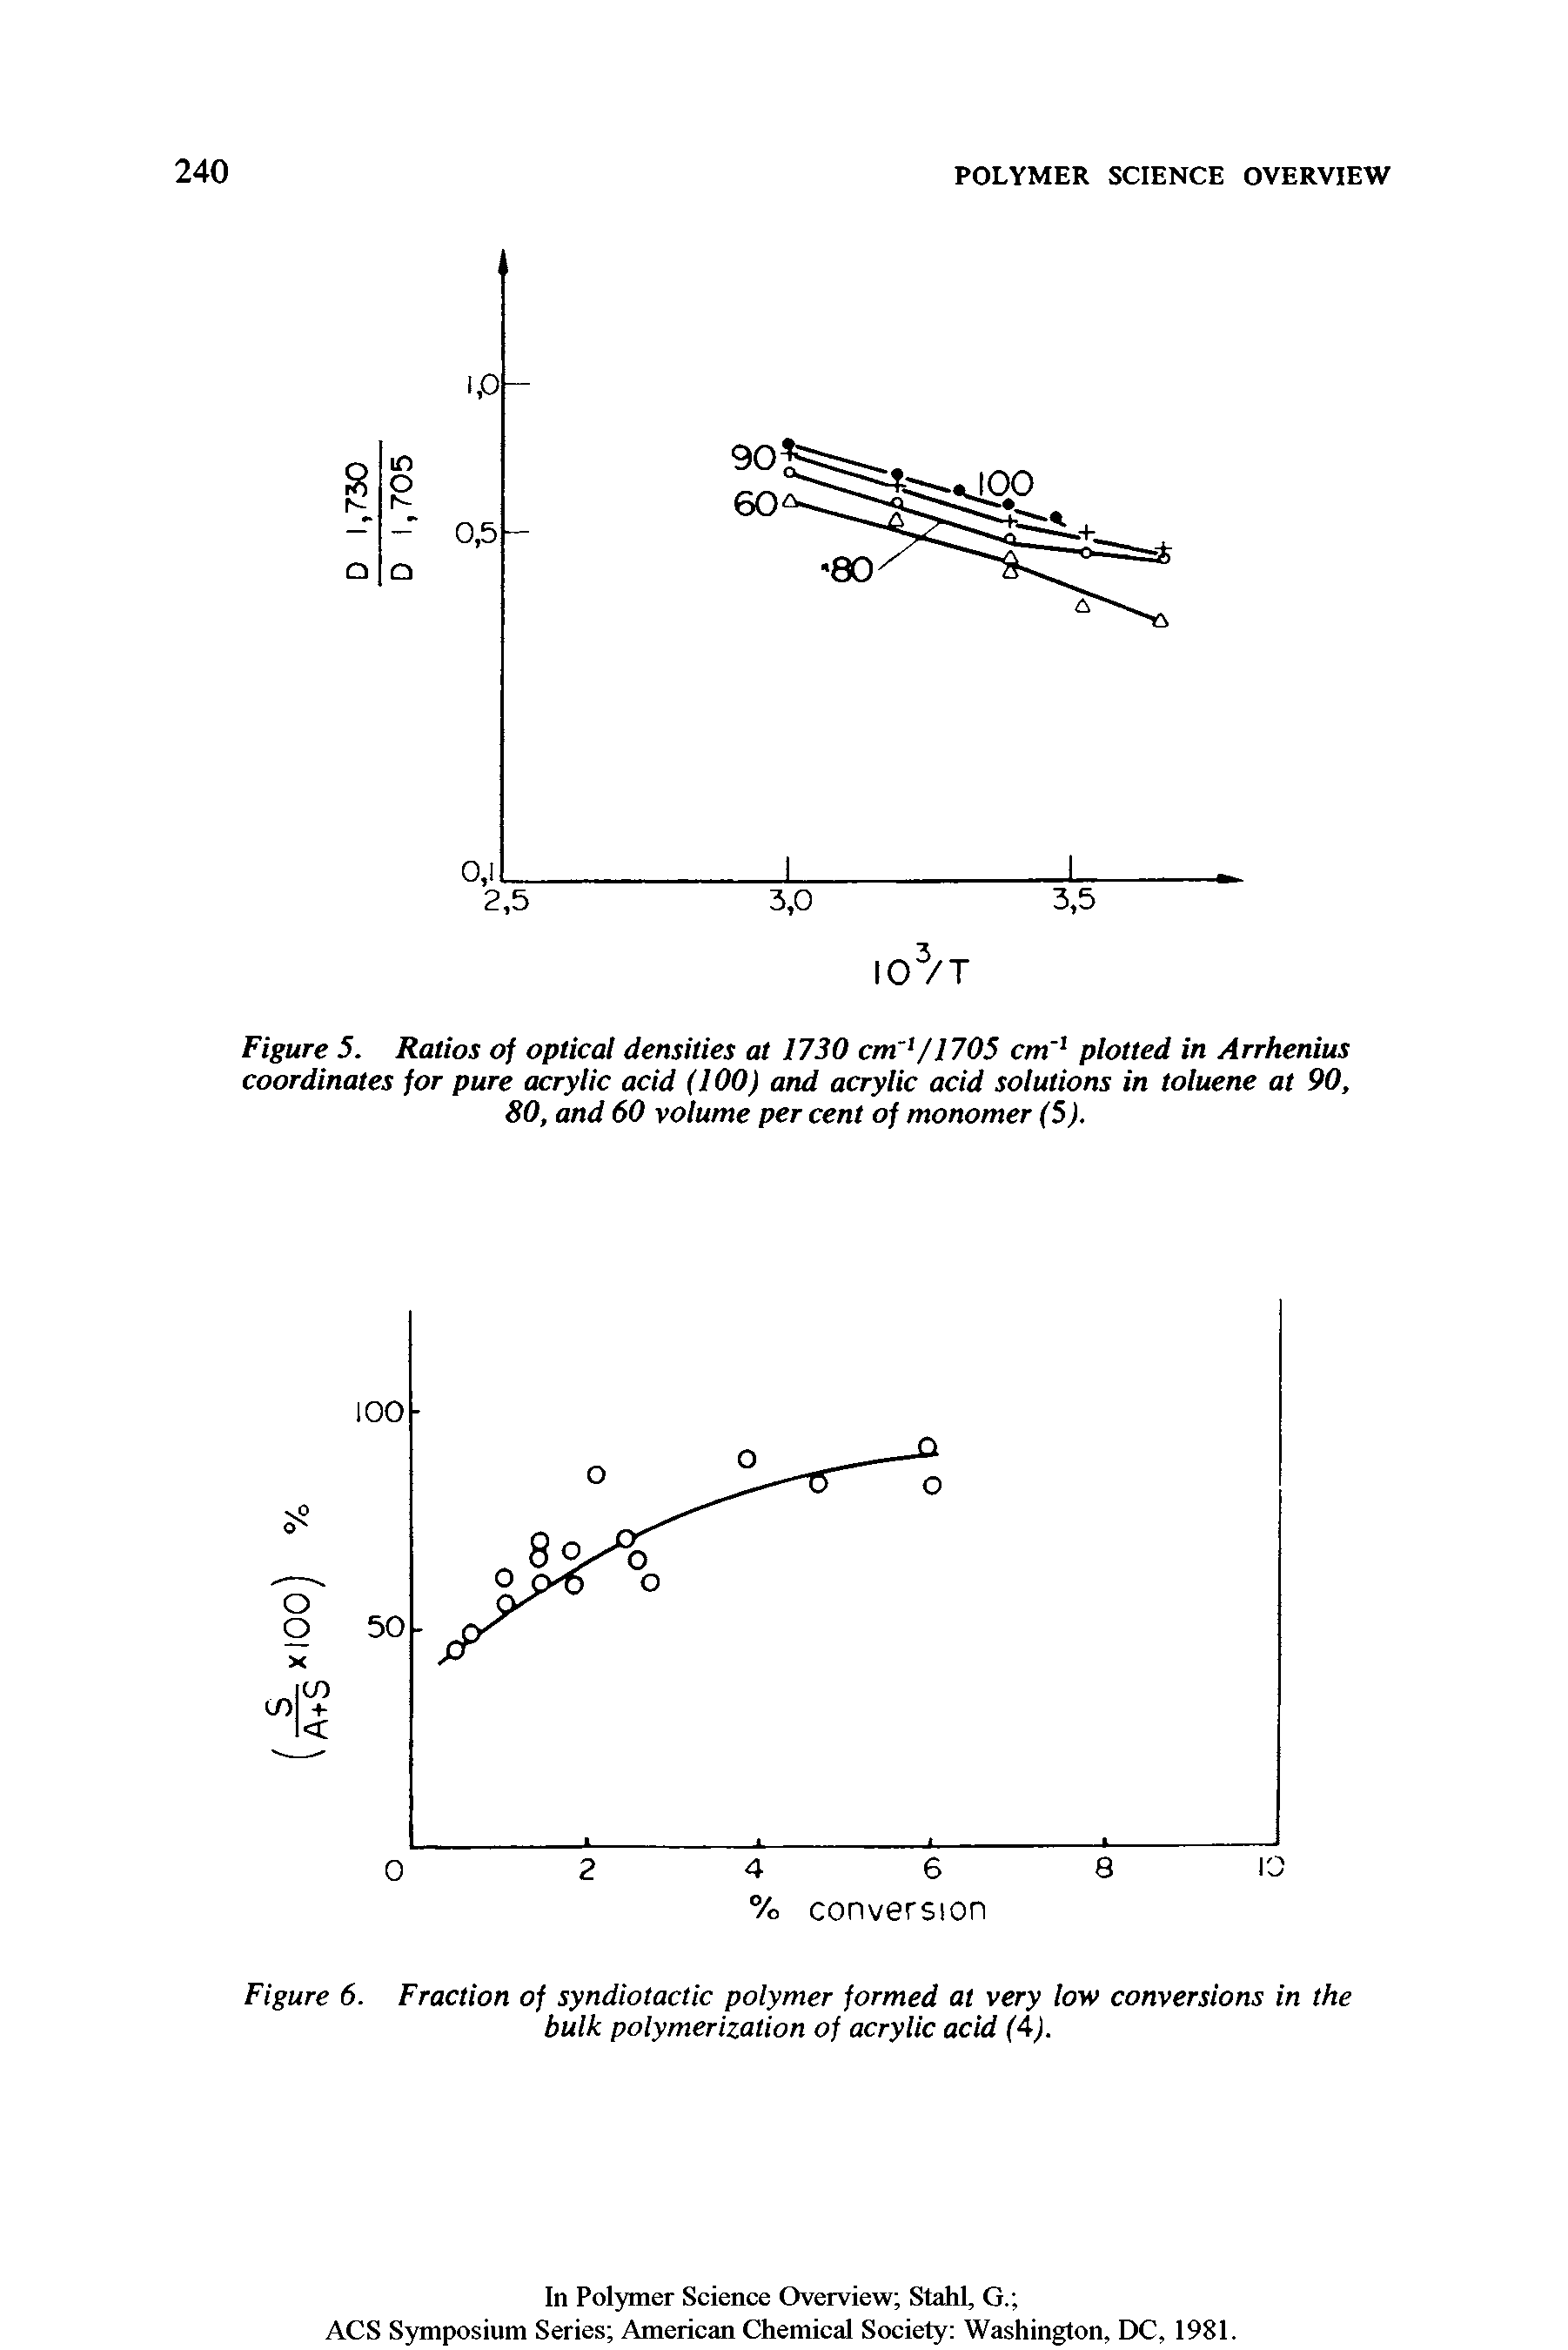 Figure 5. Ratios of optical densities at 1730 cm 1/1705 cm1 plotted in Arrhenius coordinates for pure acrylic acid (100) and acrylic acid solutions in toluene at 90, 80, and 60 volume per cent of monomer (5).